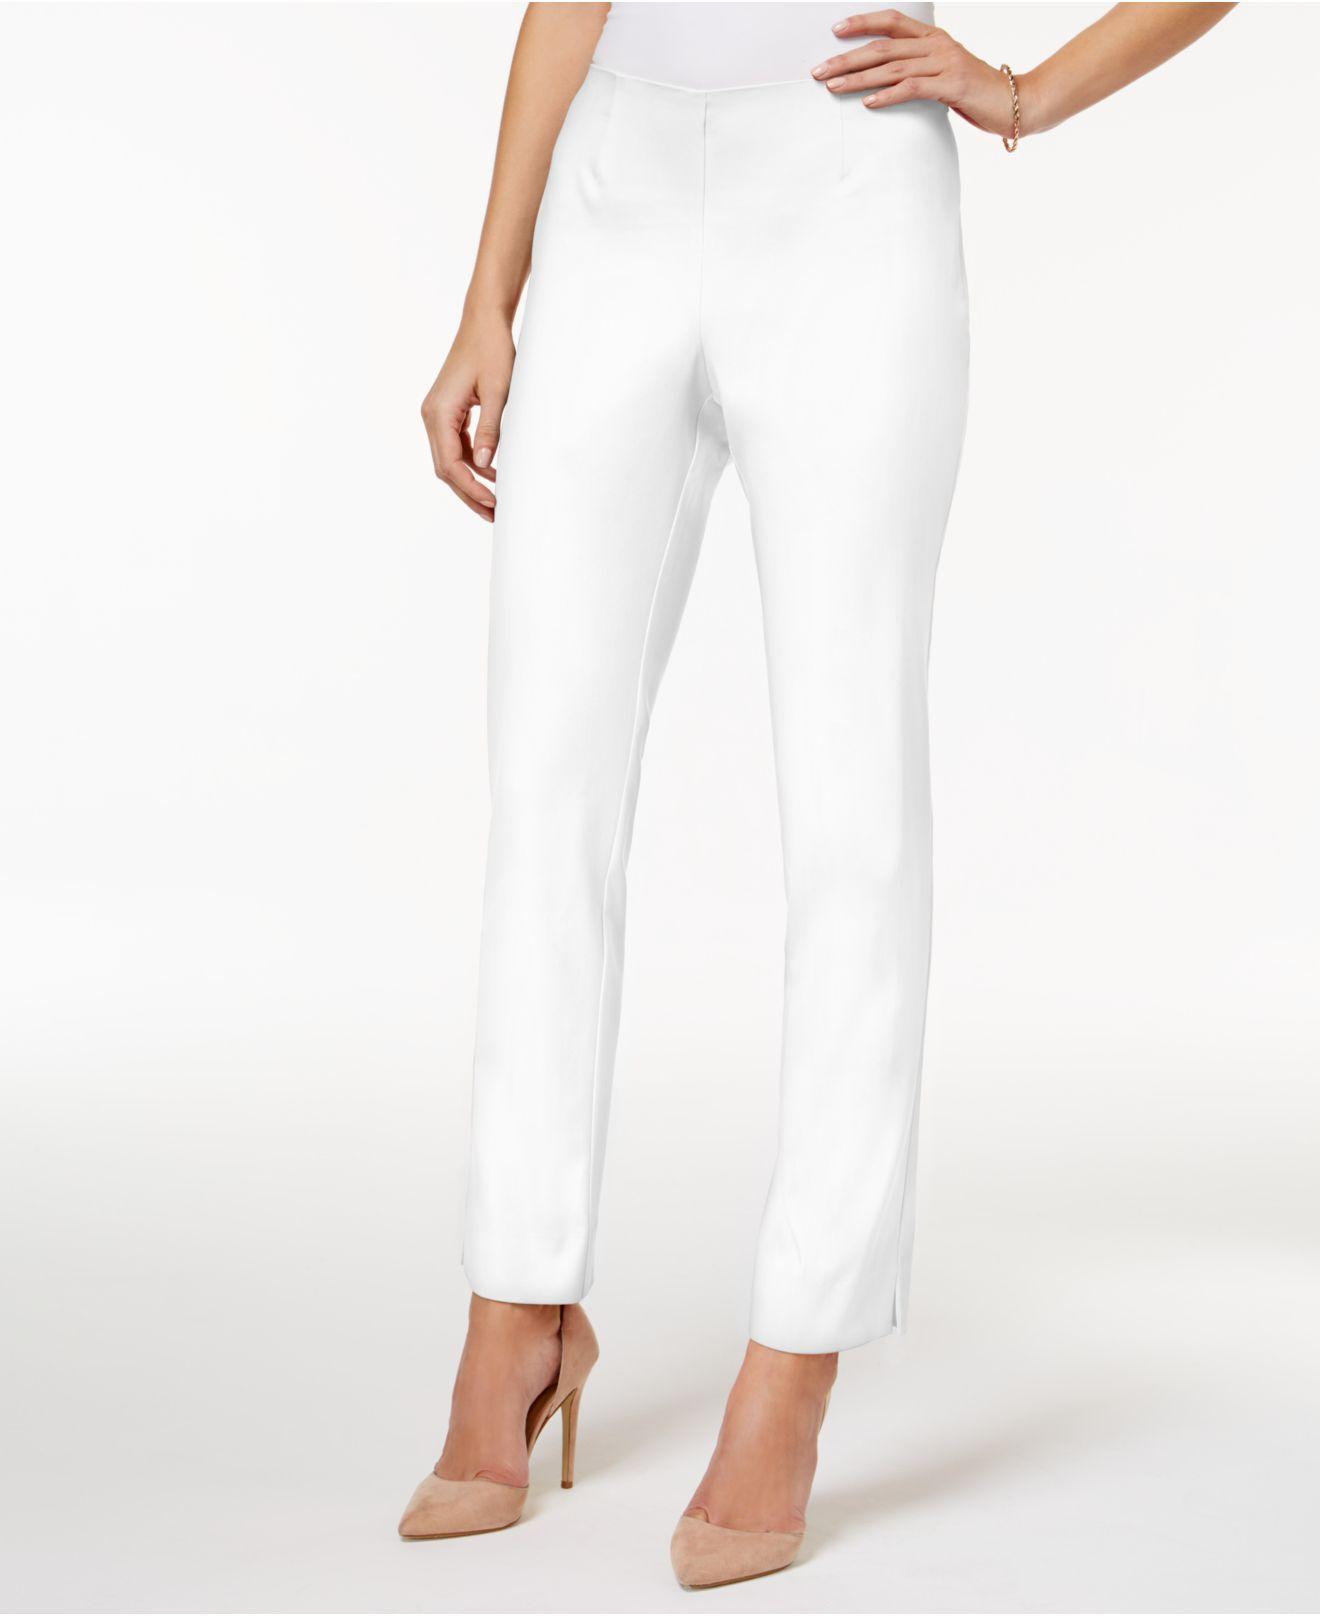 Lyst - Charter Club Slim-leg Ankle Pants in White